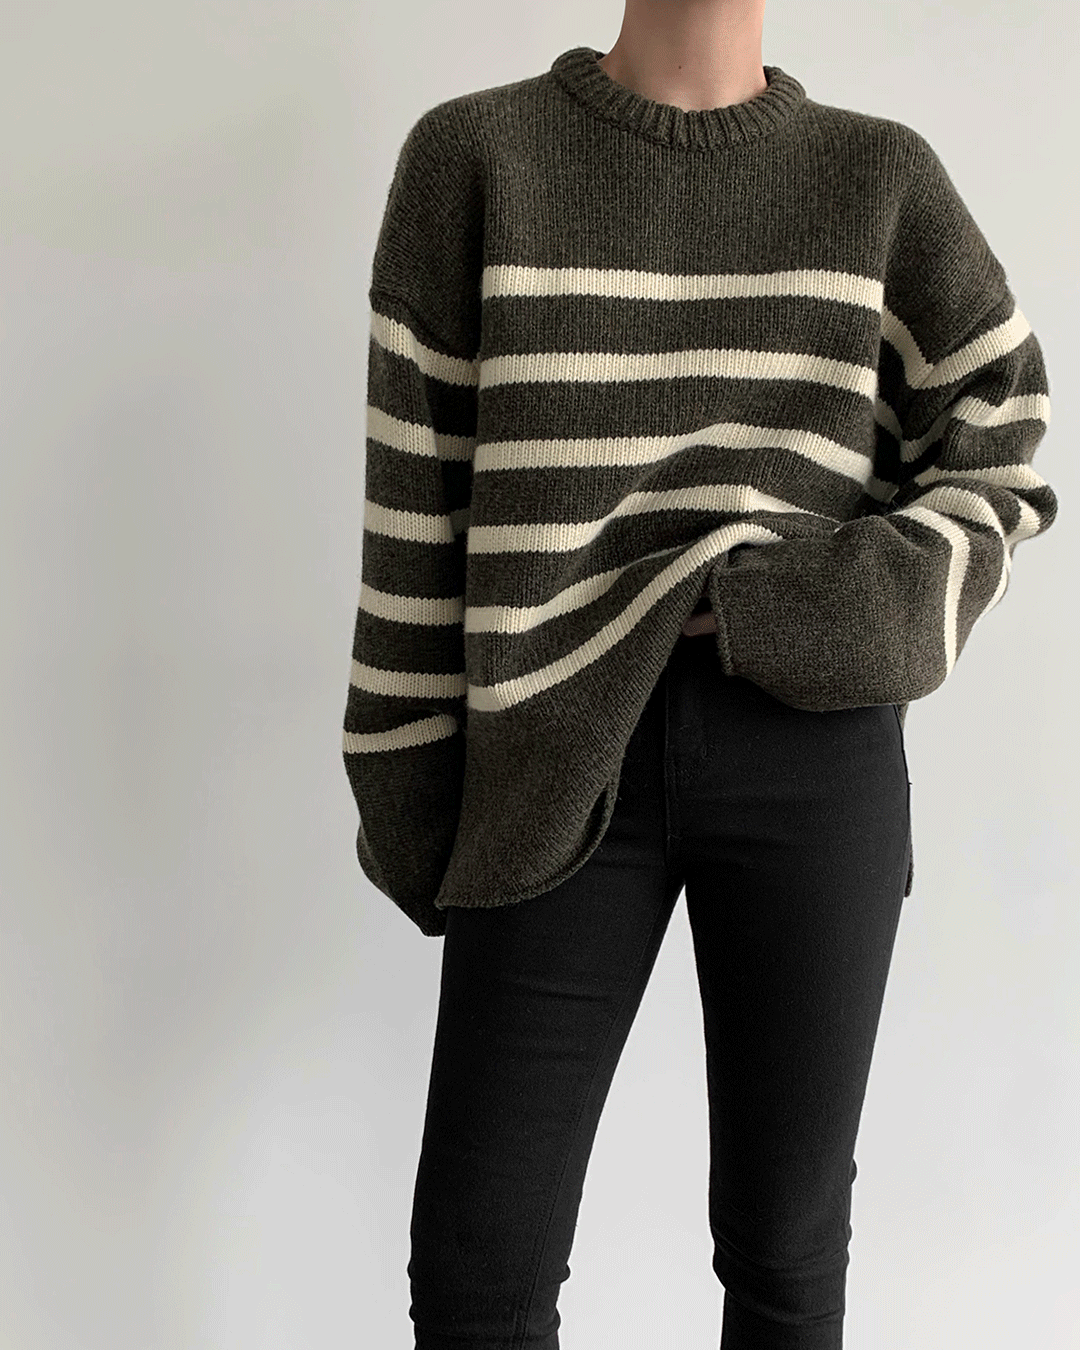 One knit